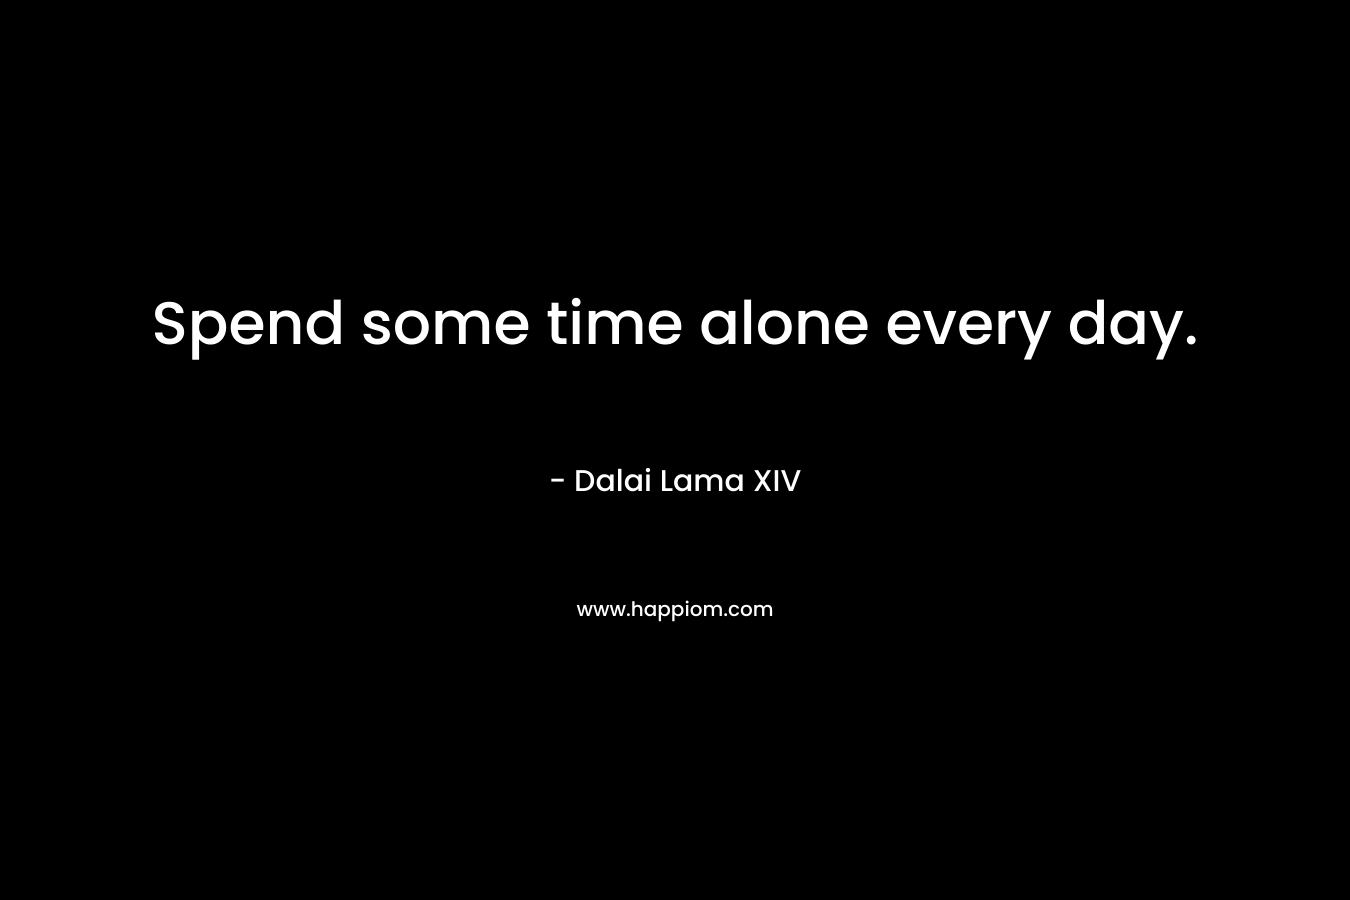 Spend some time alone every day. – Dalai Lama XIV